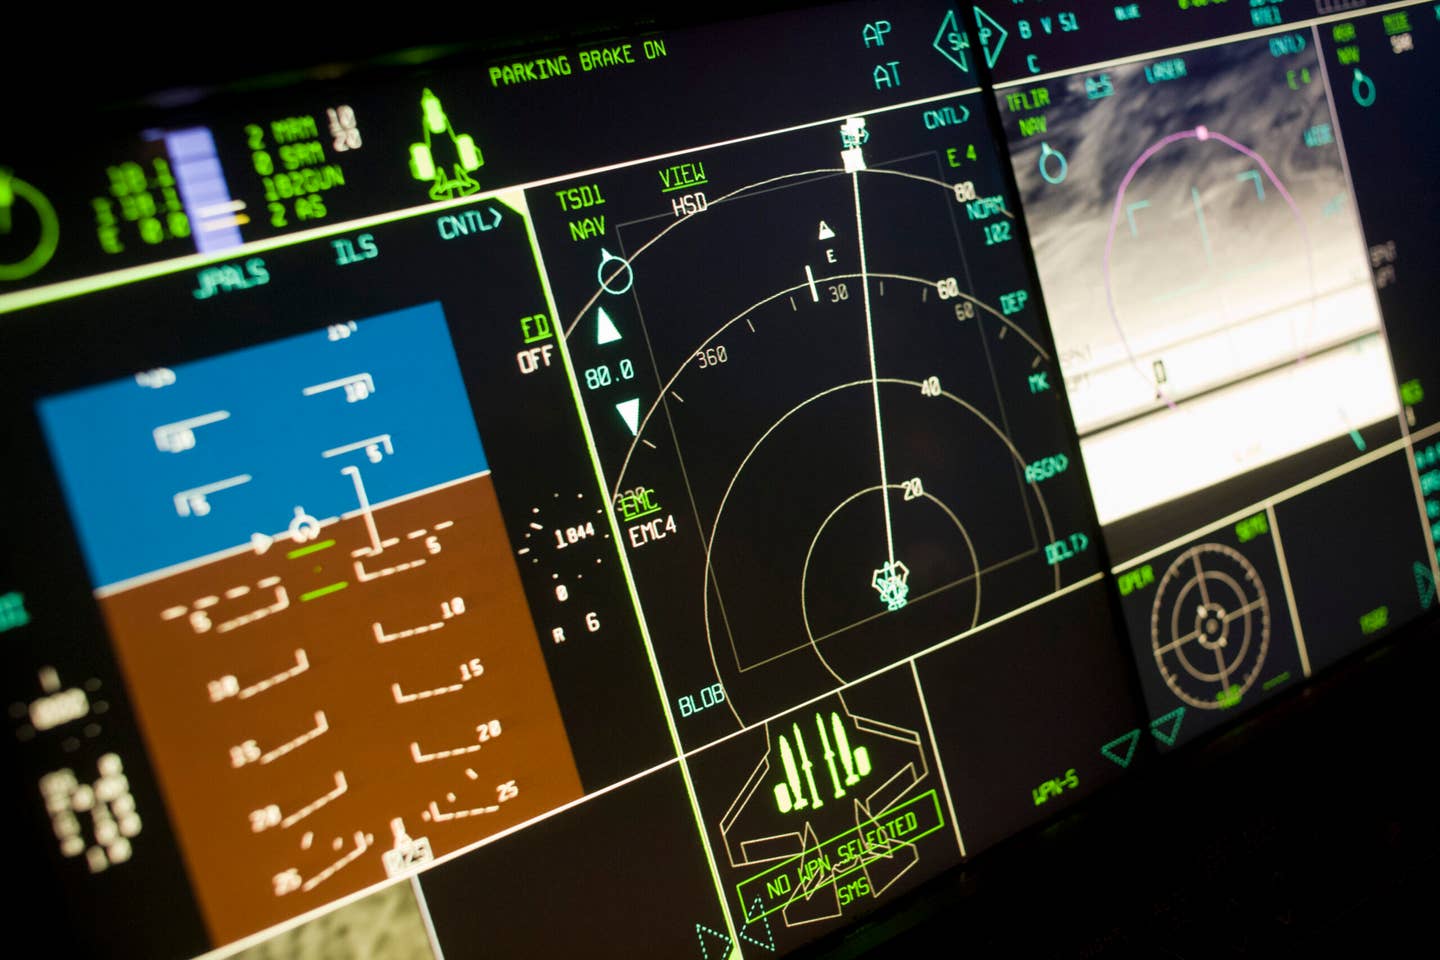 Glowing cockpit instrumentation of a Lockheed Martin F-35 Lightning II stealth fighter. <em>Credit: Photo by In Pictures Ltd./Corbis via Getty Images</em>